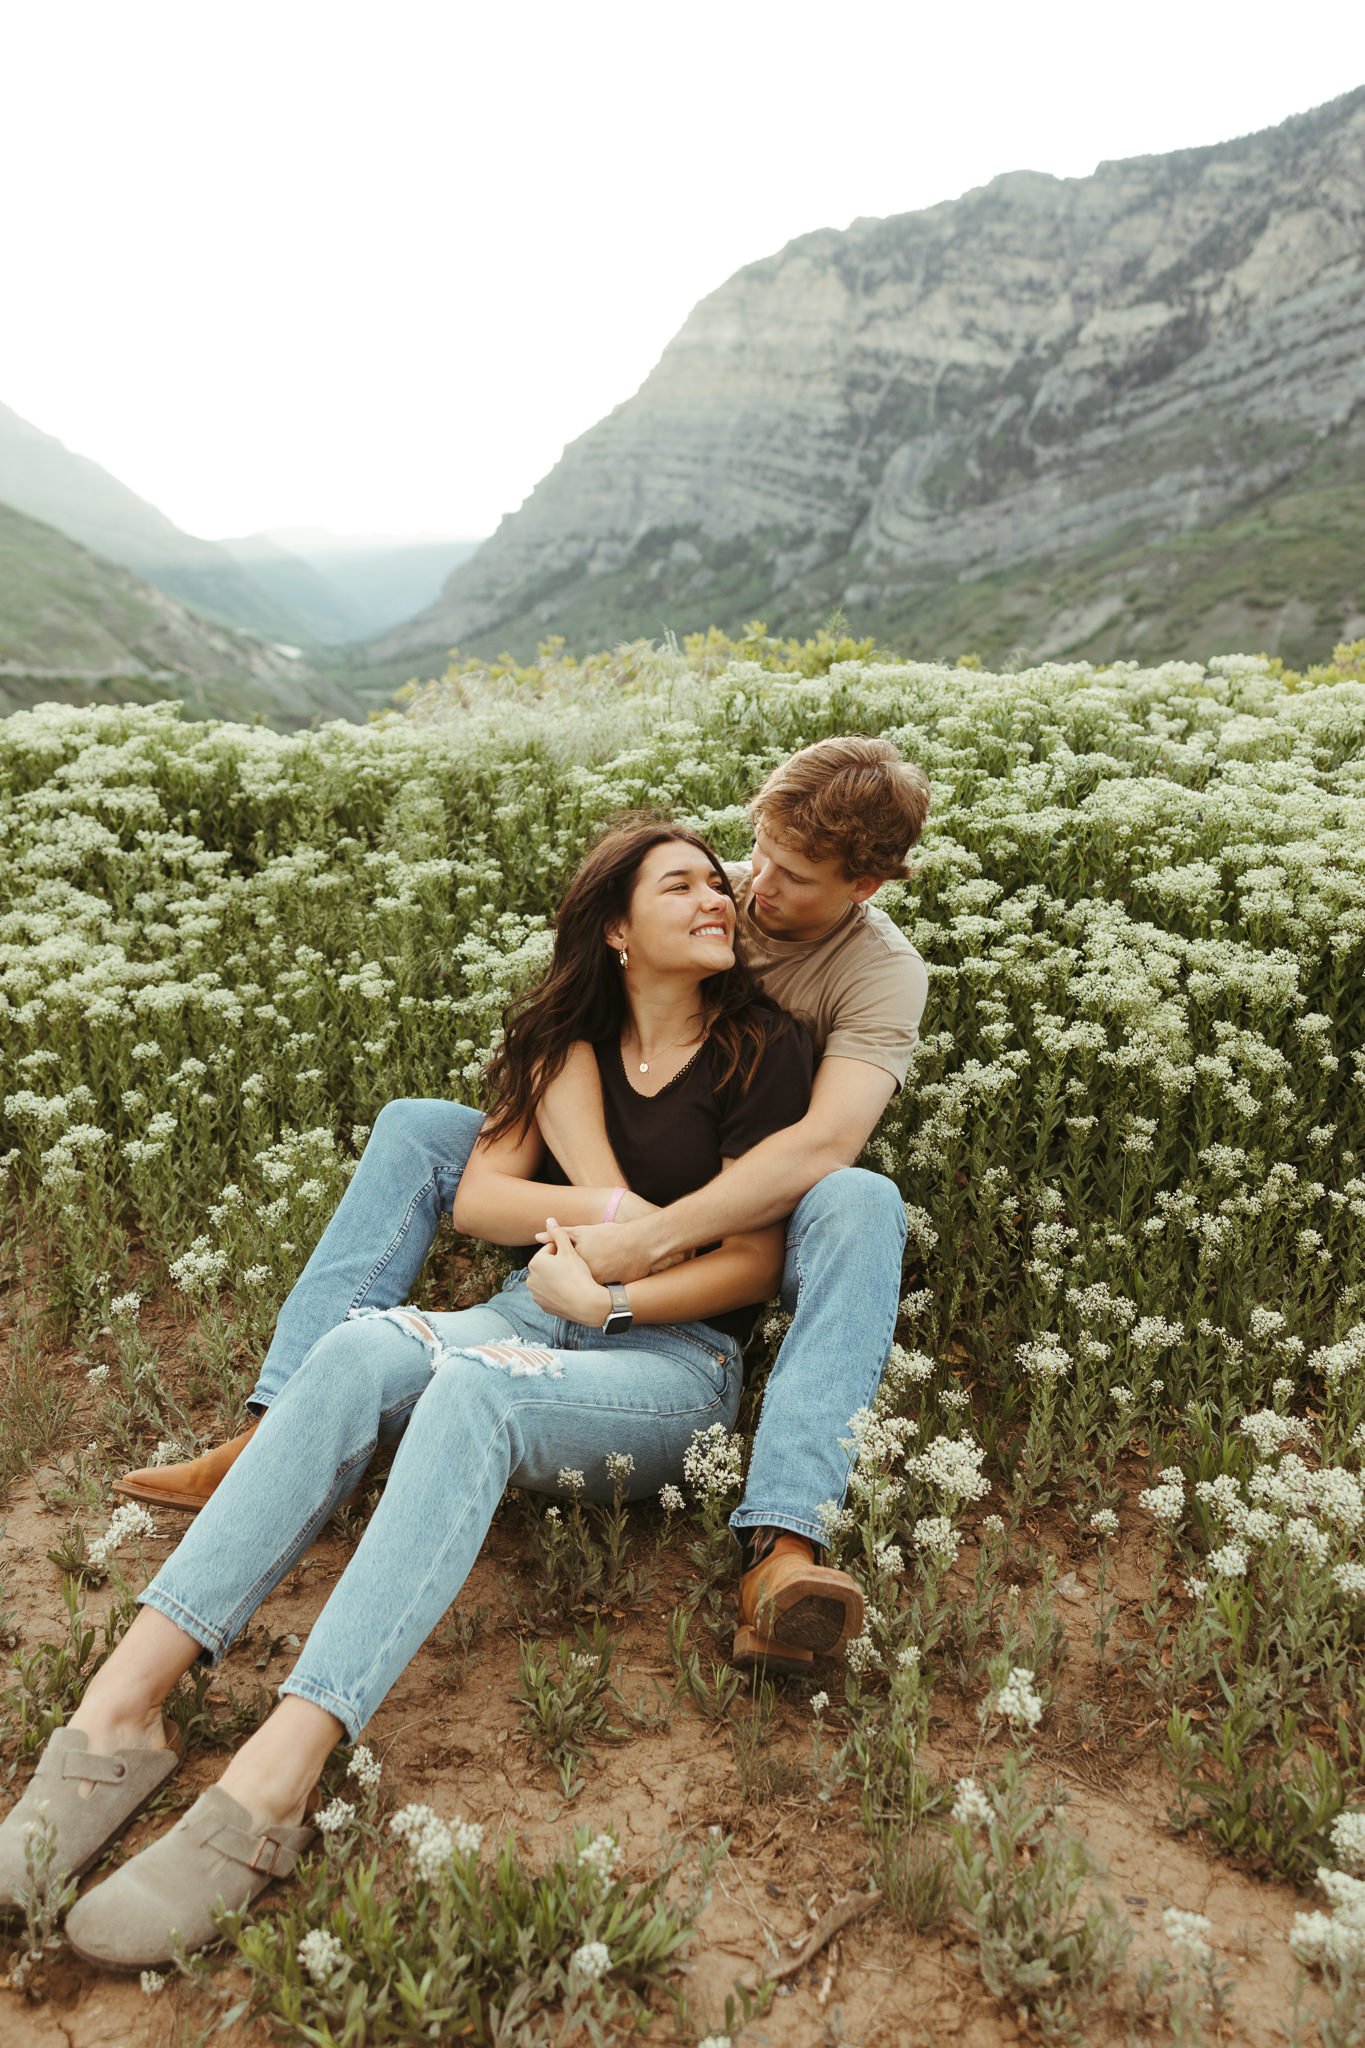 Spring-Provo-Canyon-Wildflowers-Engagement-Session-8